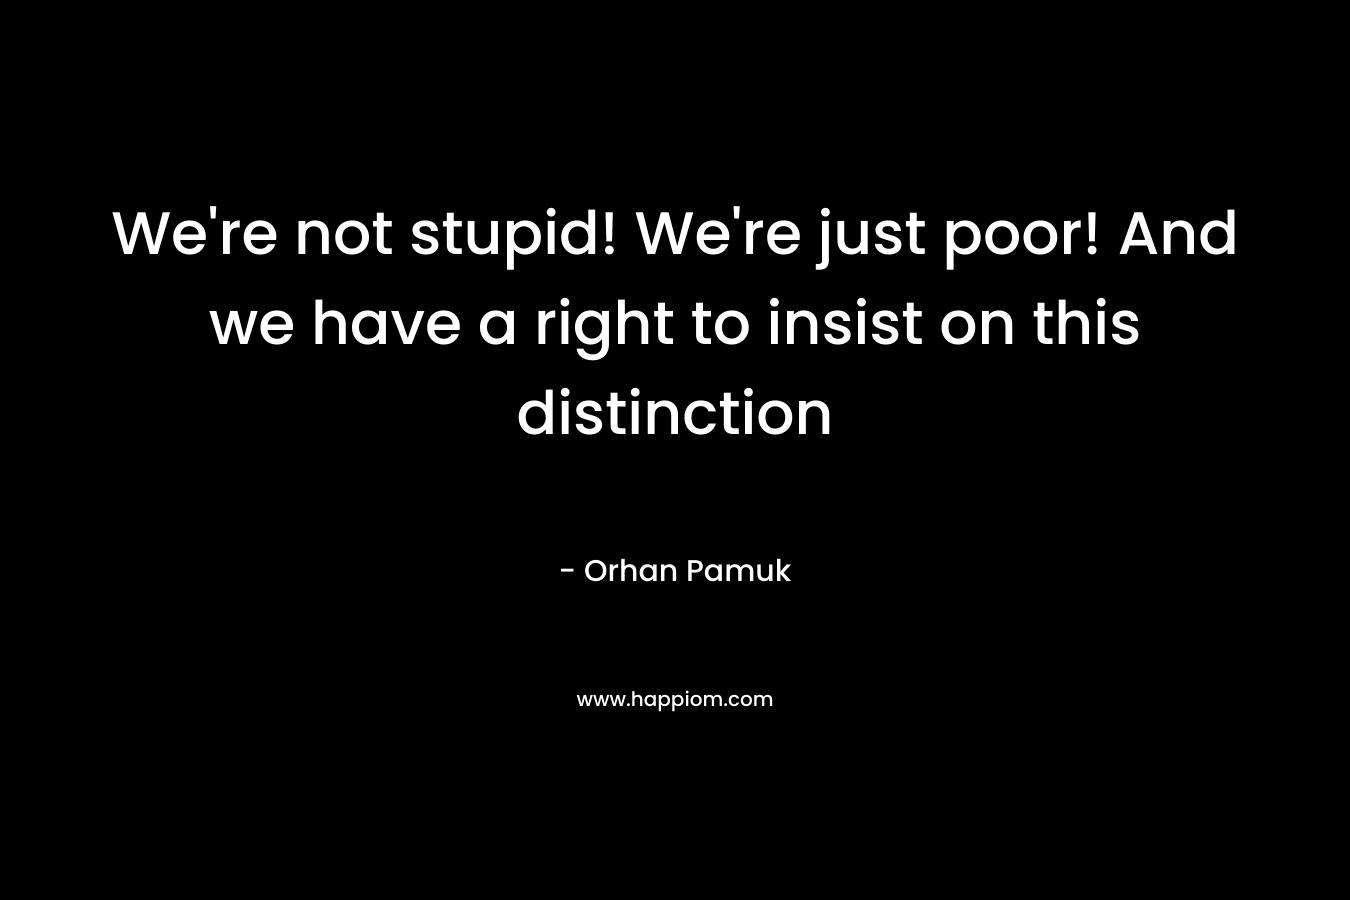 We’re not stupid! We’re just poor! And we have a right to insist on this distinction – Orhan Pamuk